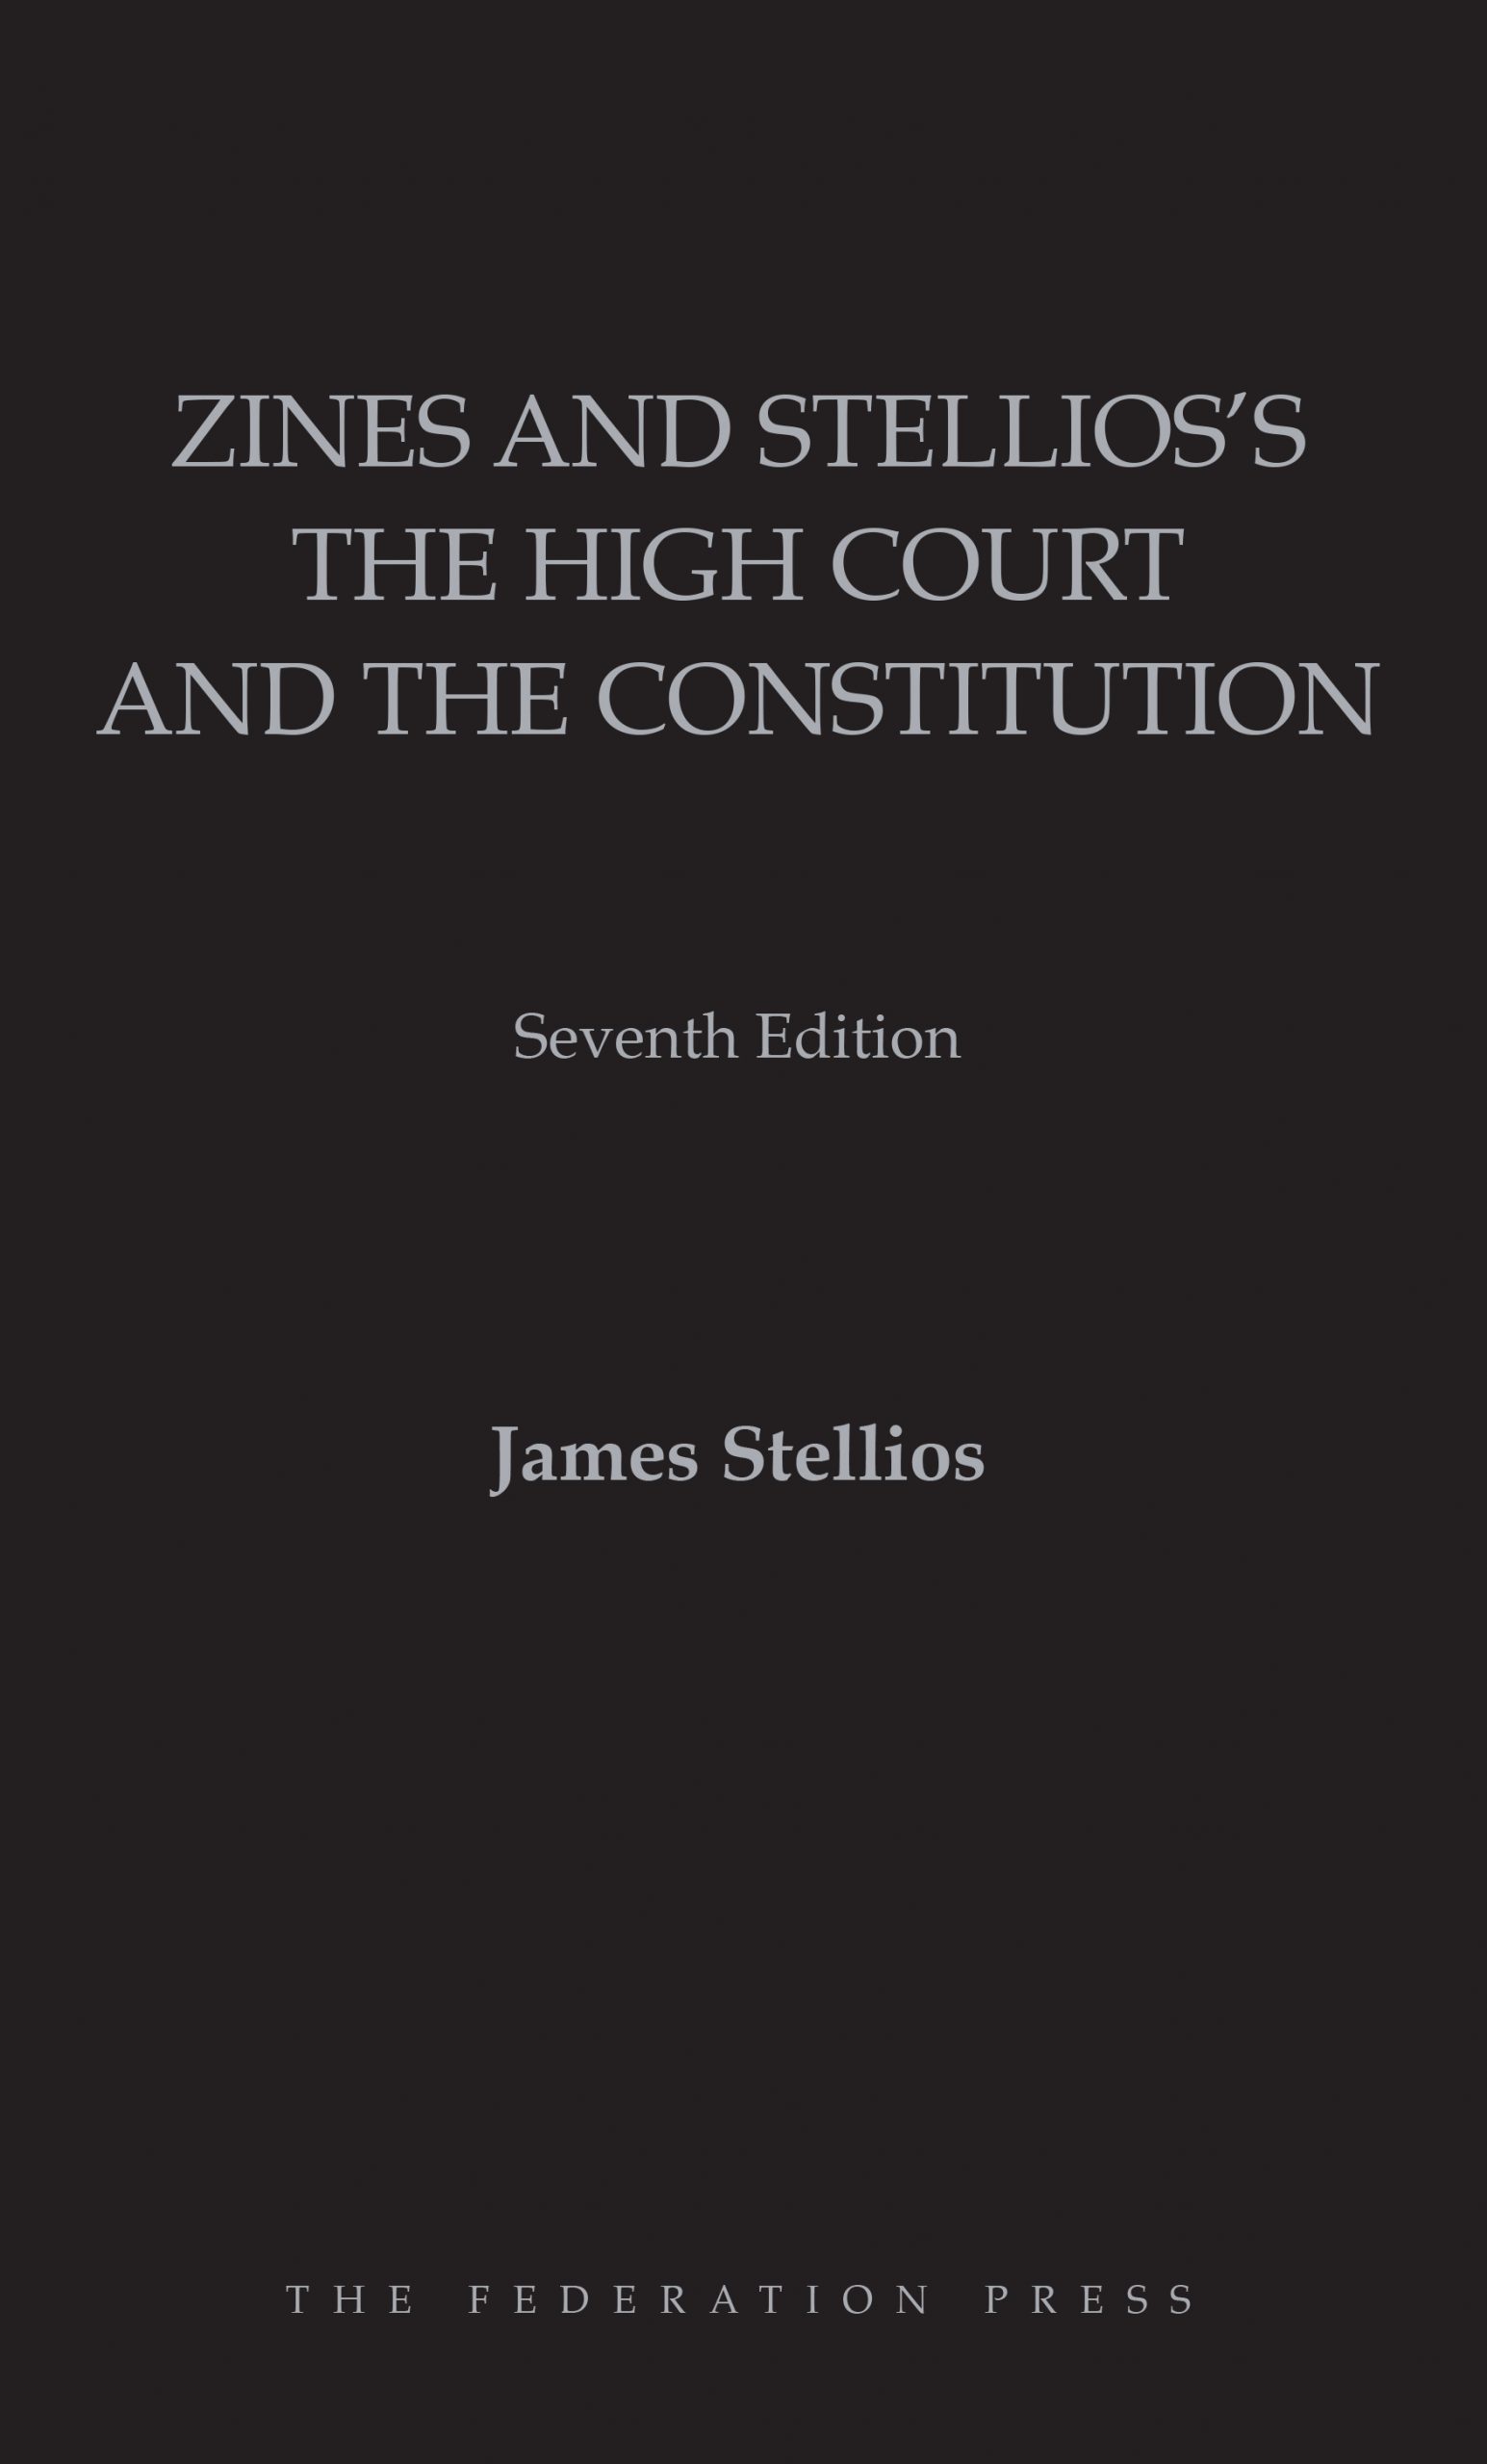 Zines and Stellios’s The High Court and the Constitution e7